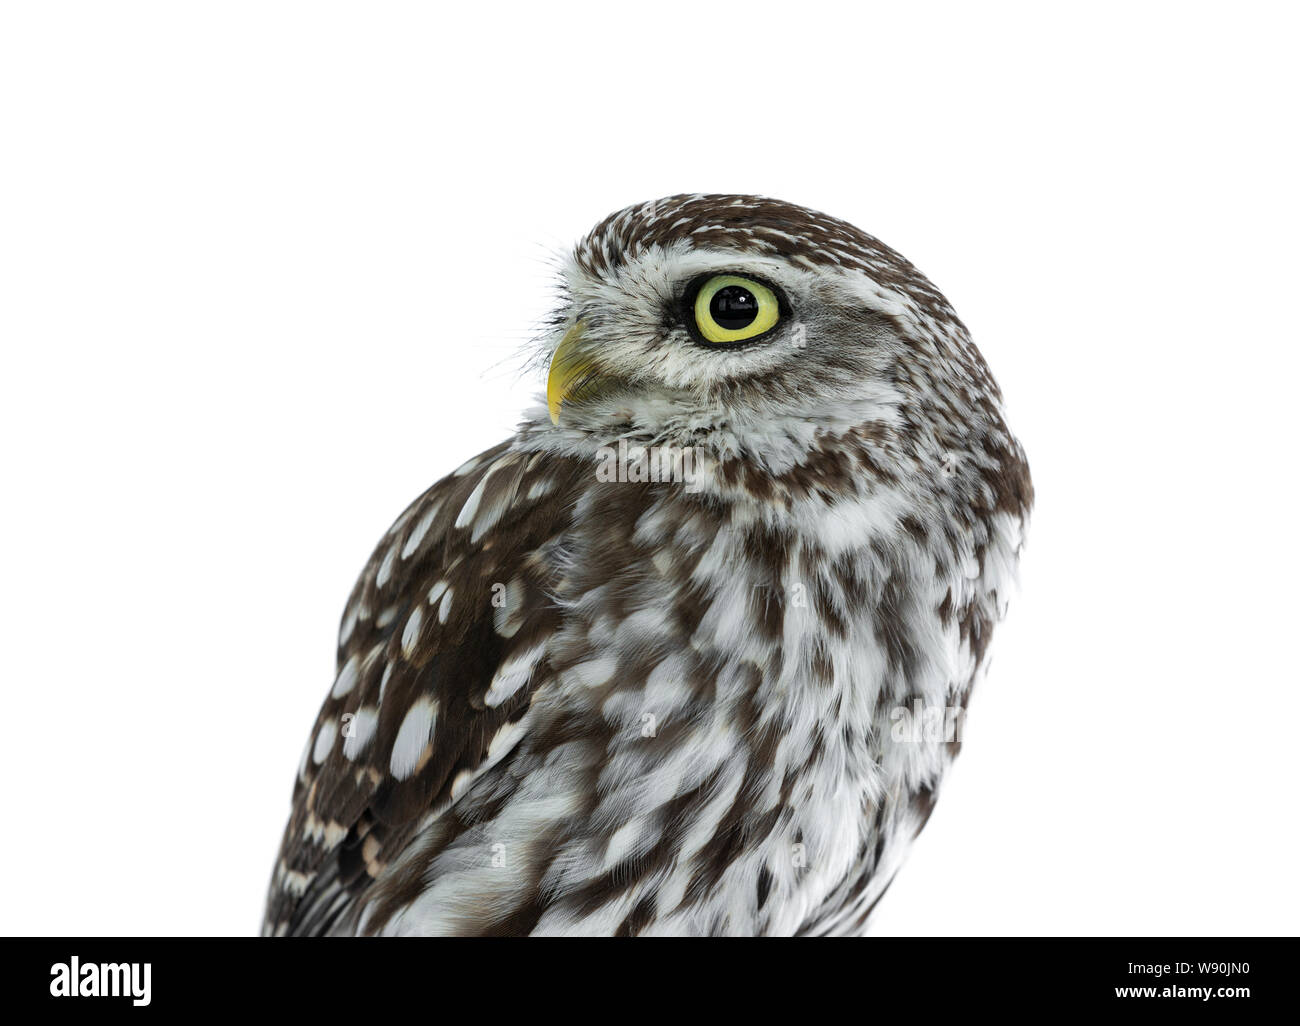 Head shot of brown white young Little Owl. Looking to the side with yellow eyes. Isolated on white background. Stock Photo